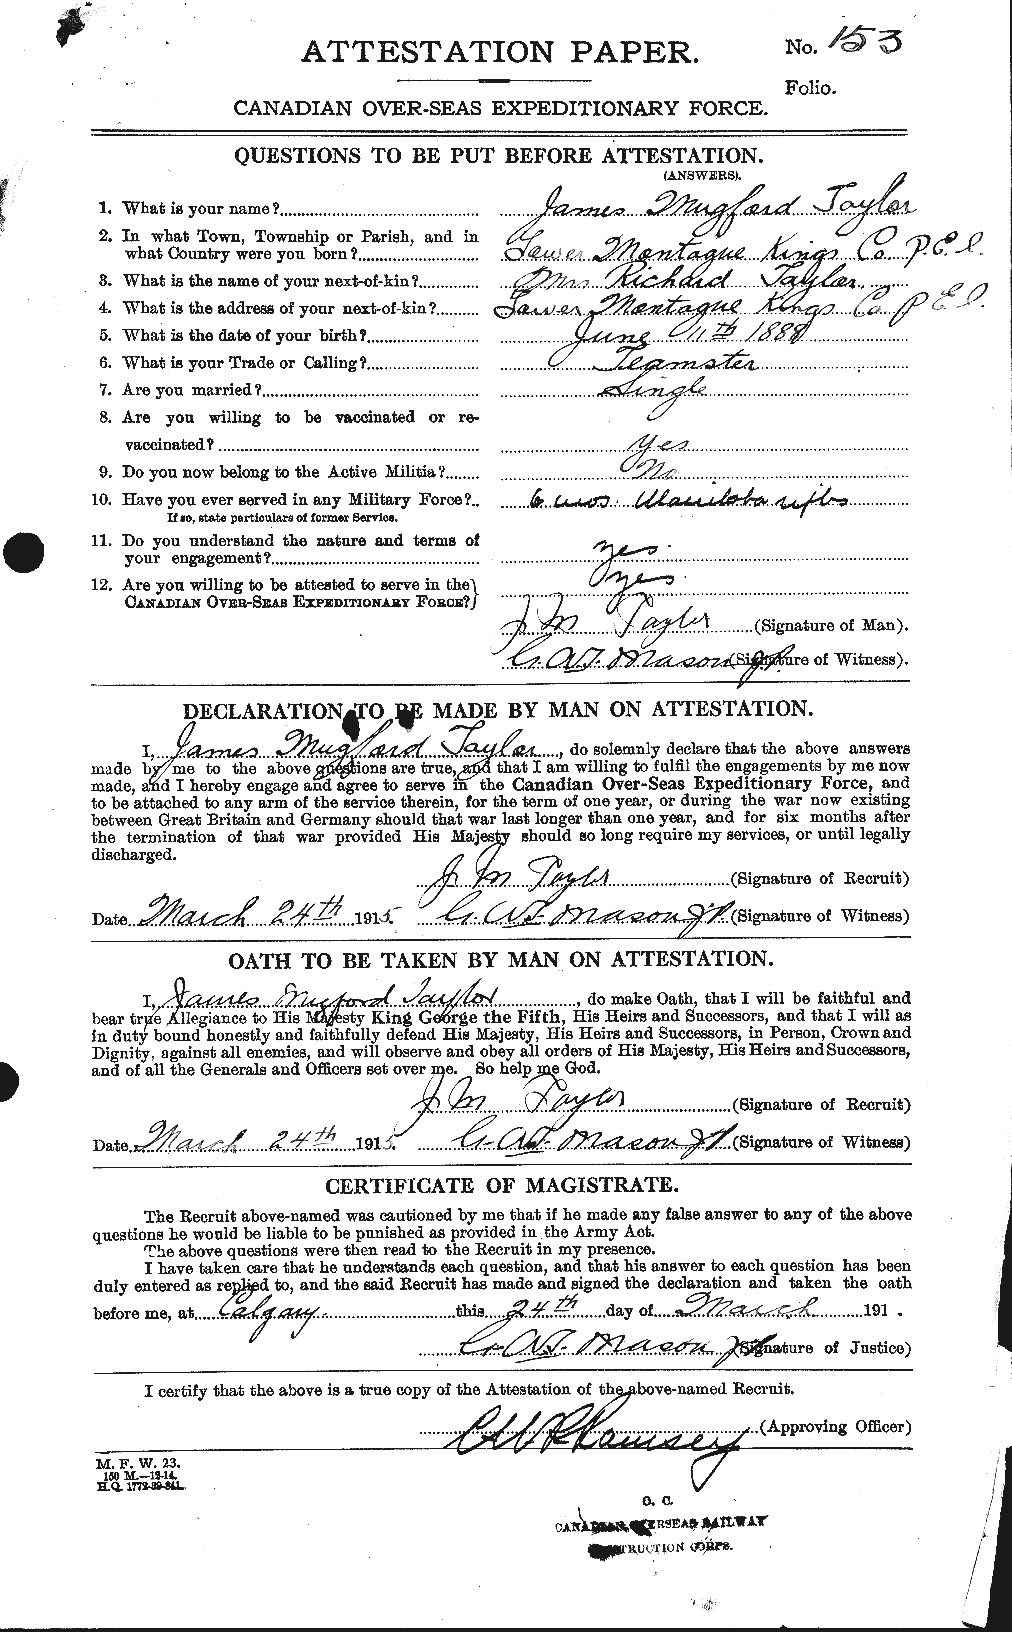 Personnel Records of the First World War - CEF 626943a